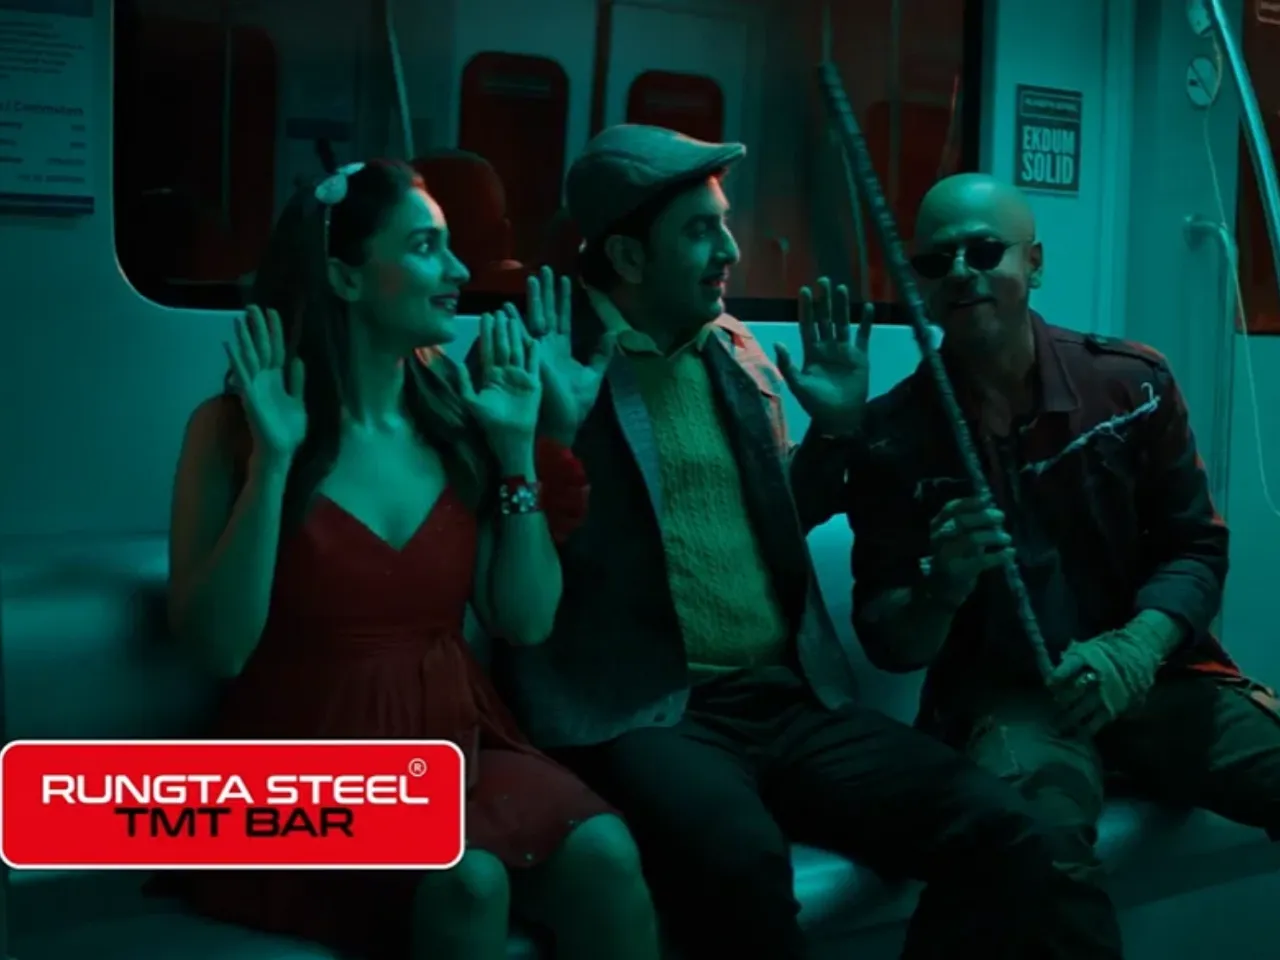 The new ad of Rungta Steel TMT bars finds a innovative way to pay tribute to SRK, Alia Bhatt, and Ranbir Kapoor!